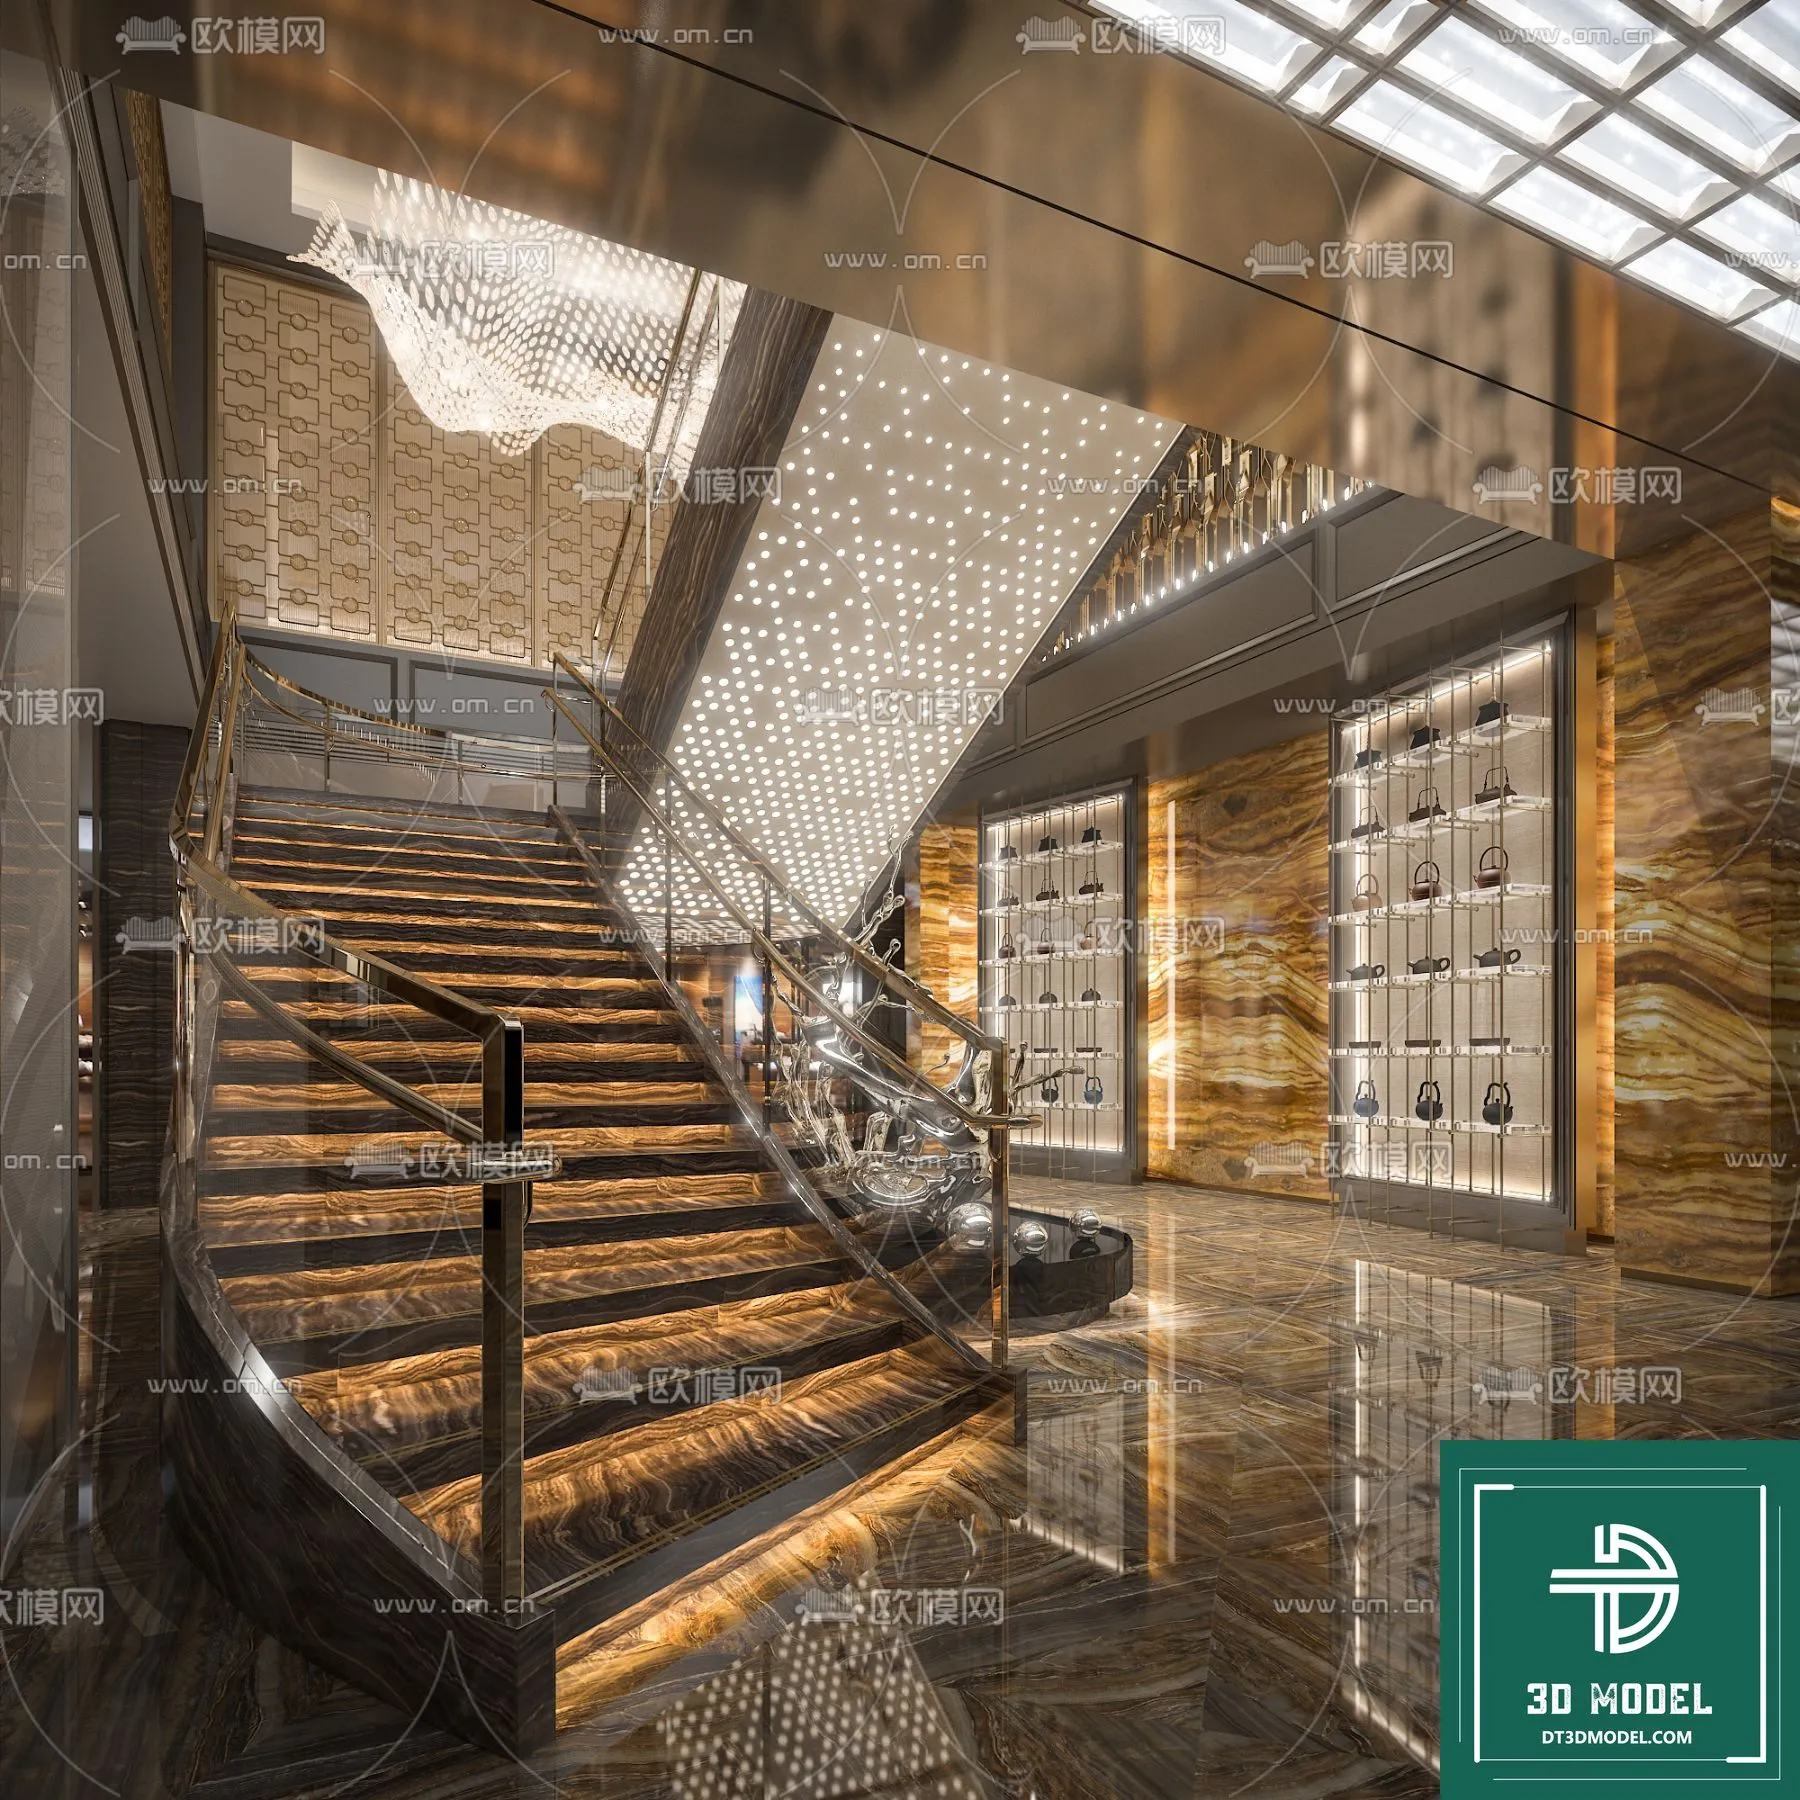 STAIR – 3DS MAX MODELS – 047 – PRO